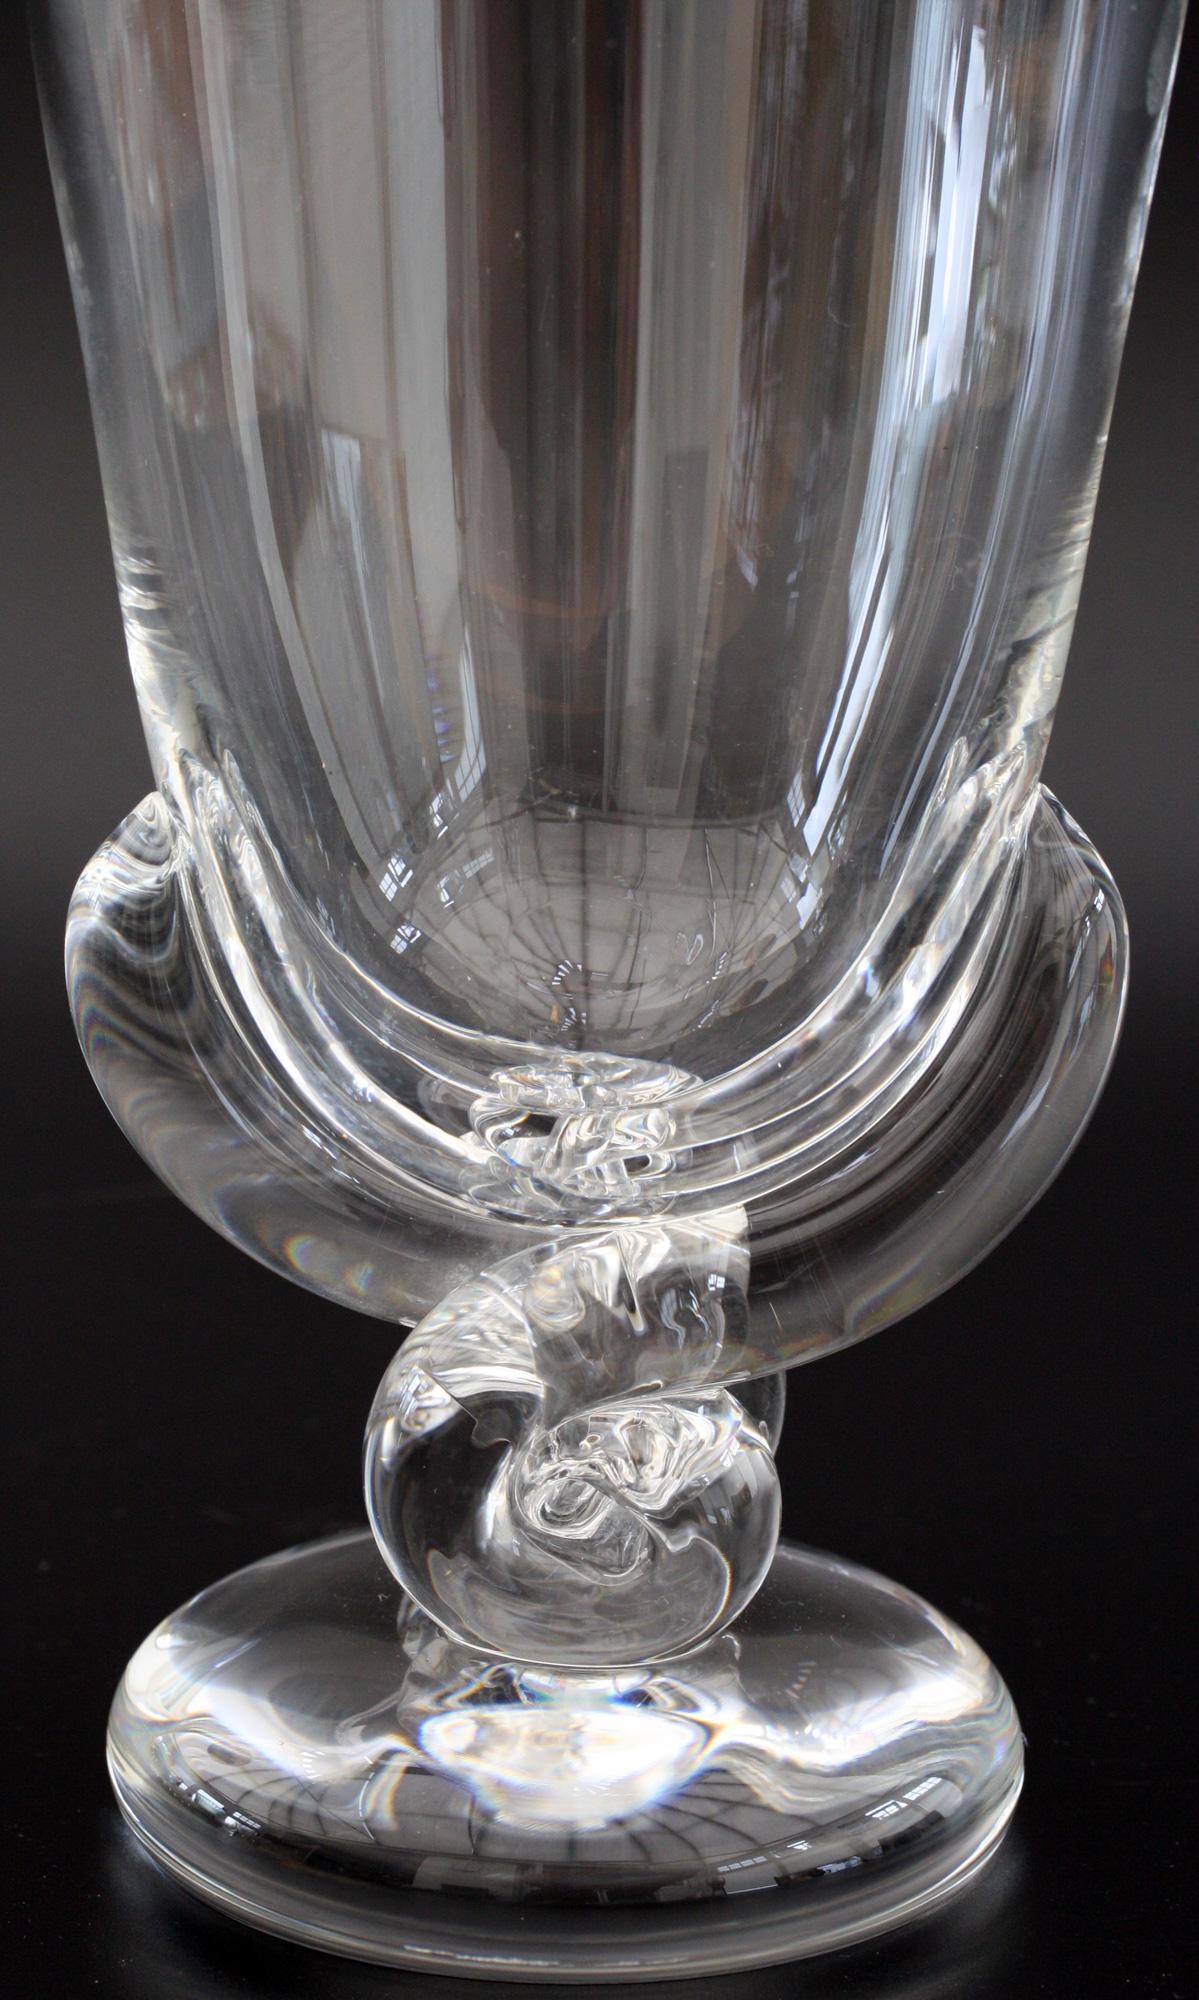 A stunning Art Deco Steuben art glass stylized flower shaped vase designed by George Thompson in 1942. This beautifully designed lead crystal vase stands on a heavy rounded foot with a coiled and stylized leaf shaped support and tall open flower